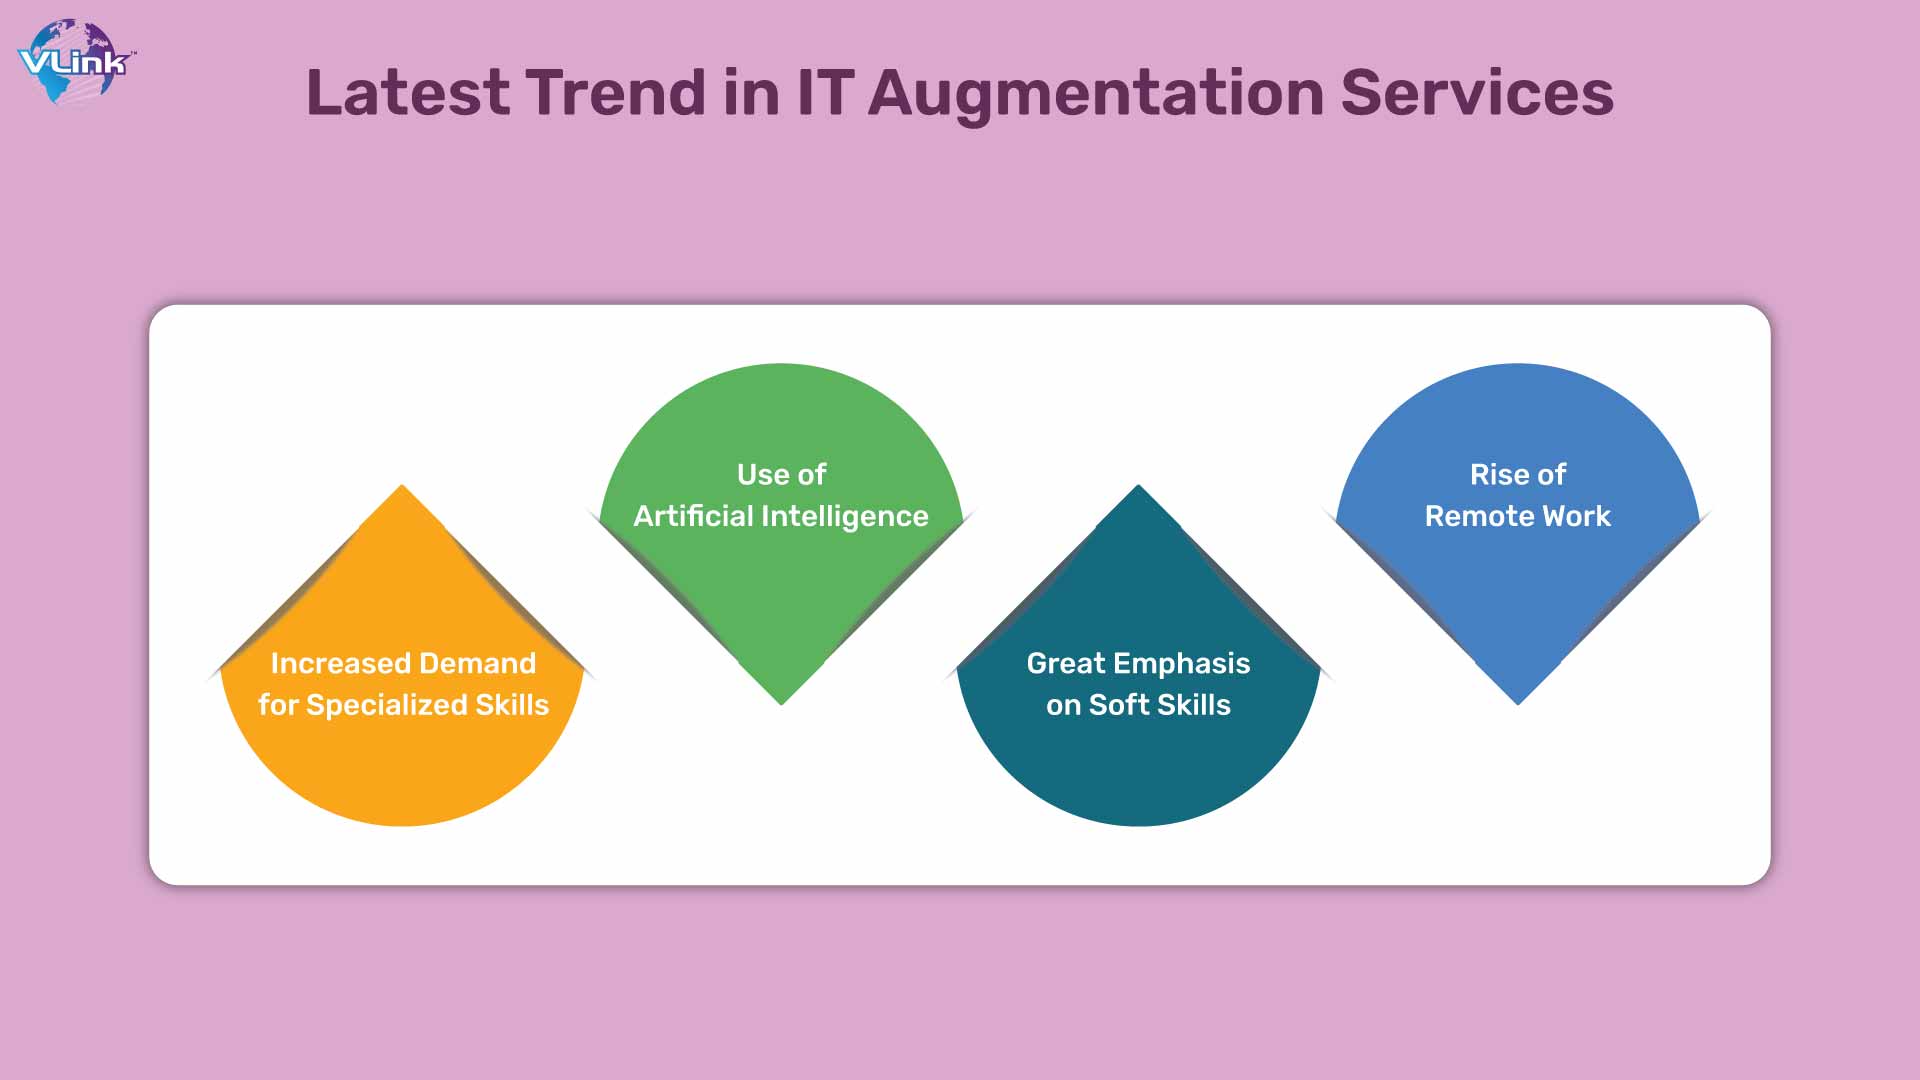 Top 5 Trends in IT Augmentation Services